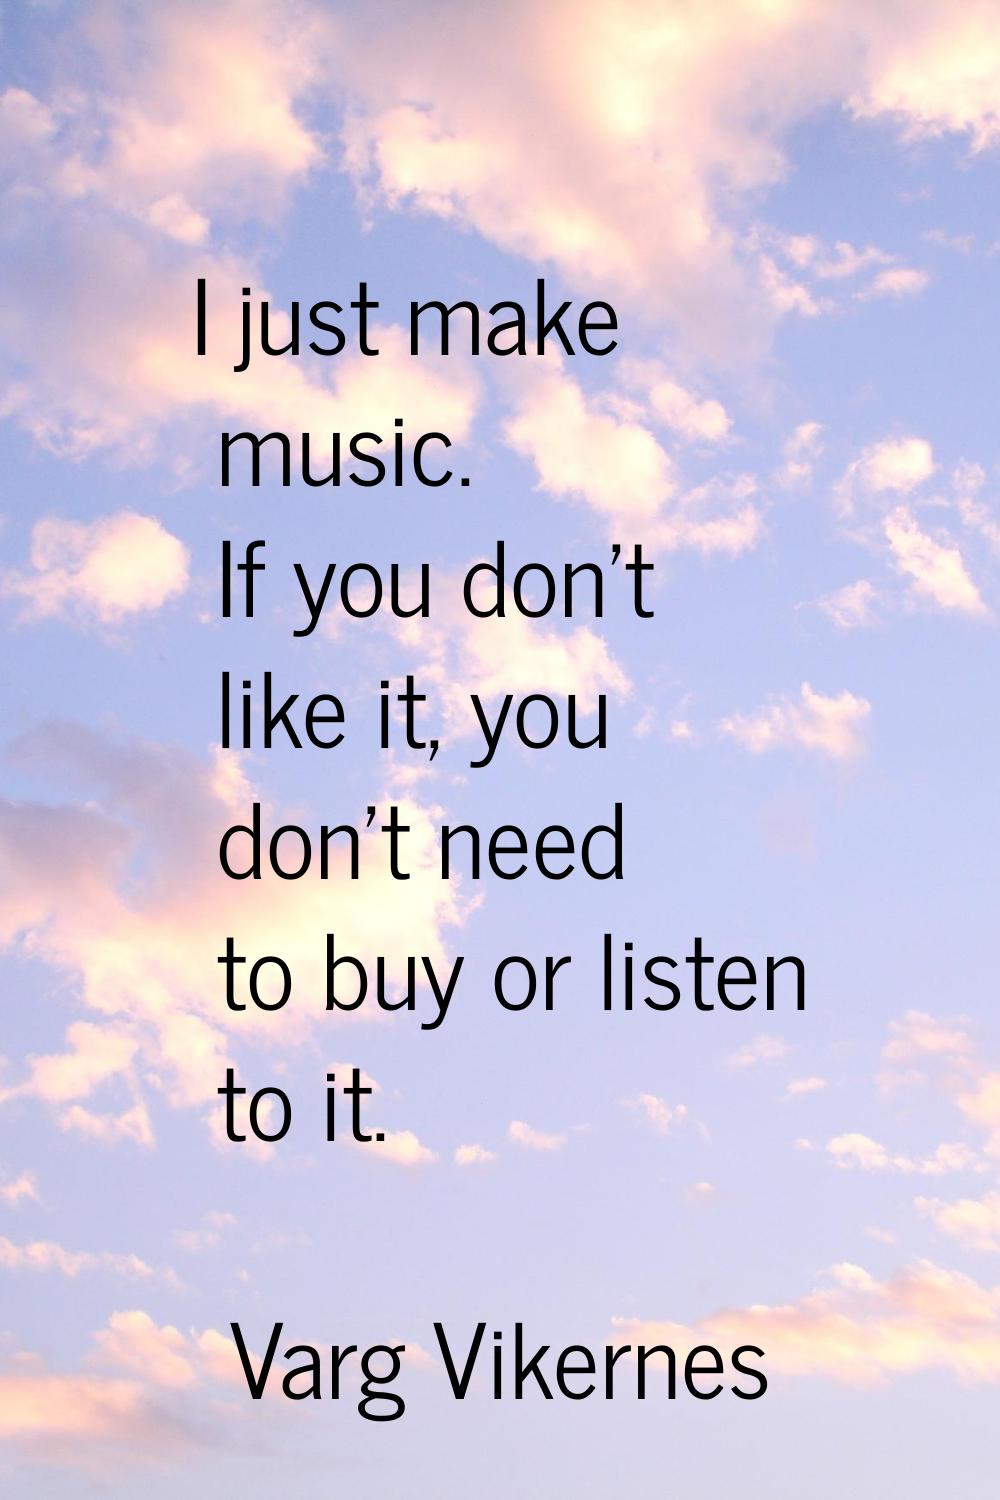 I just make music. If you don't like it, you don't need to buy or listen to it.